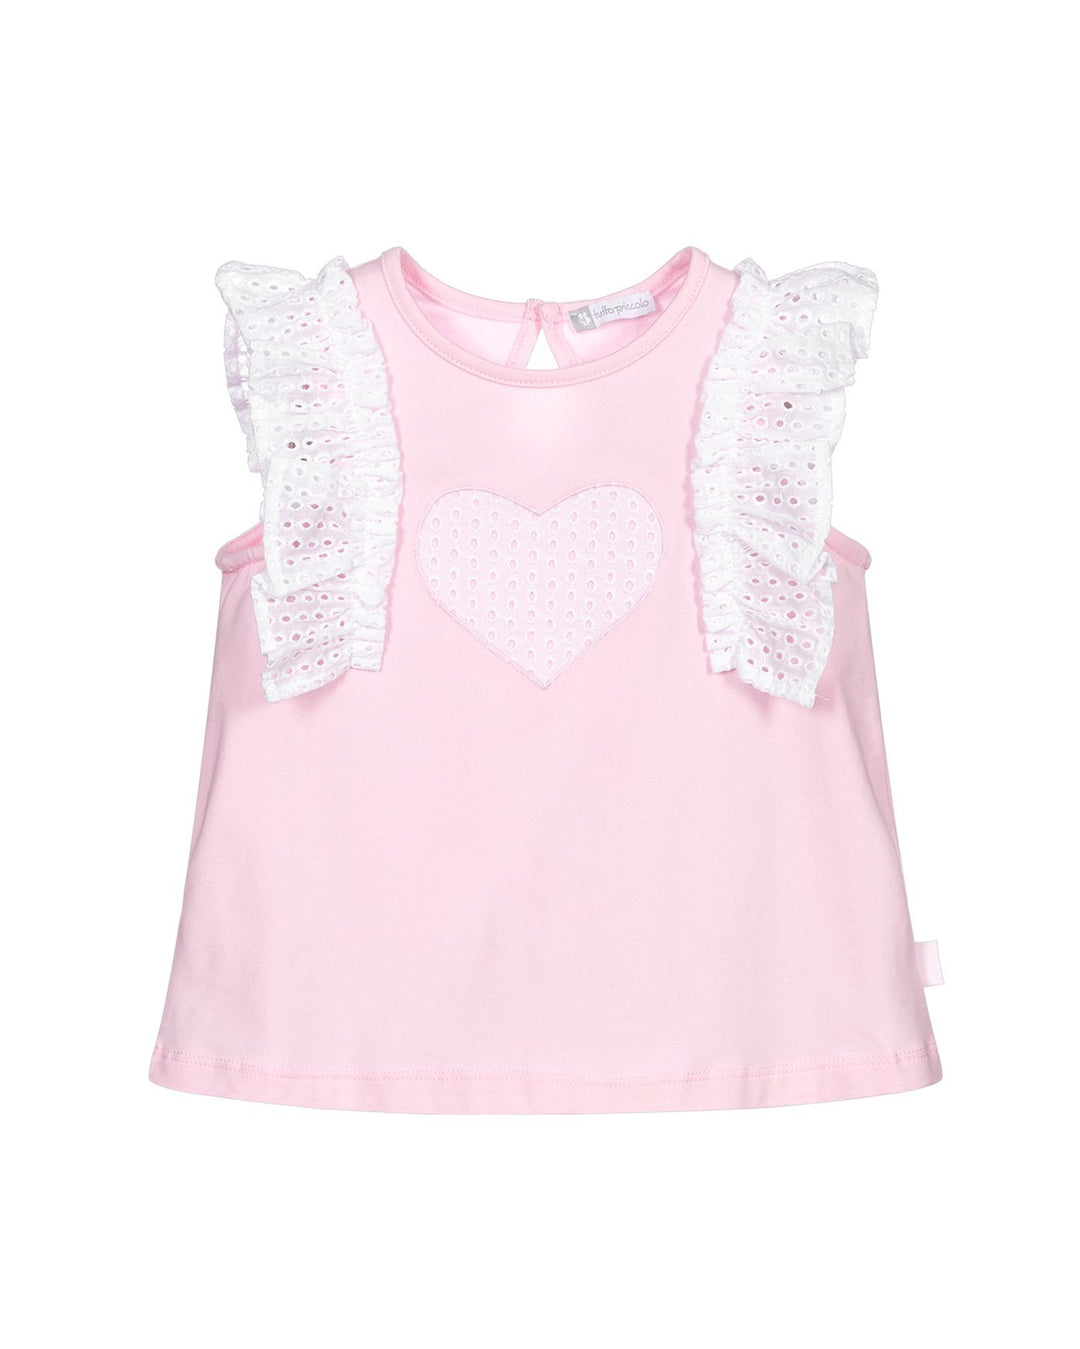 Tutto Piccolo "Everleigh" Pink Broderie Anglaise Blouse | Millie and John